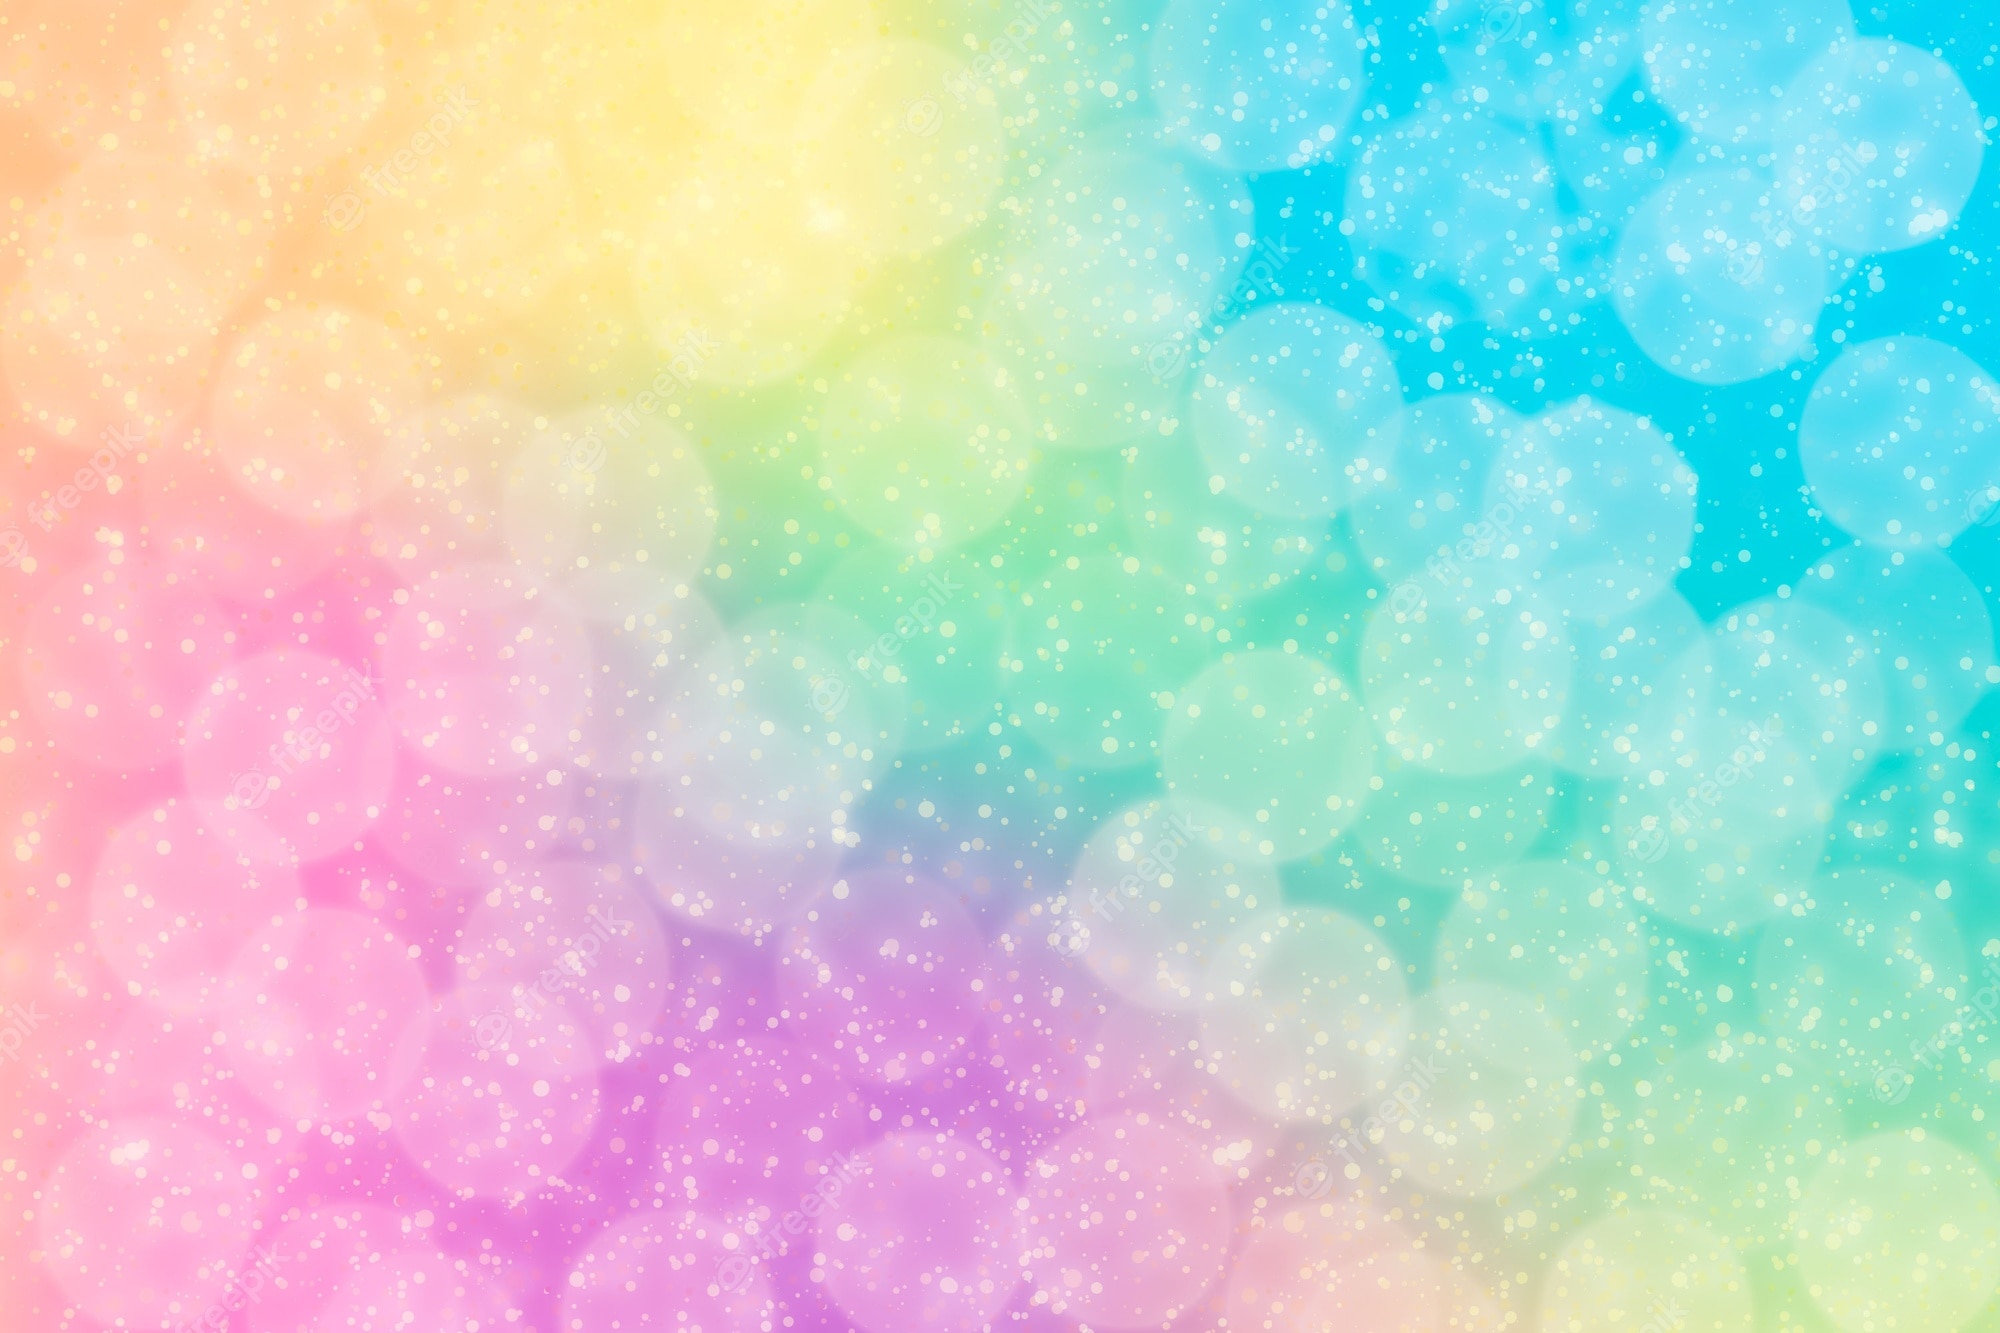 A colorful background with bubbles and stars - Pastel rainbow